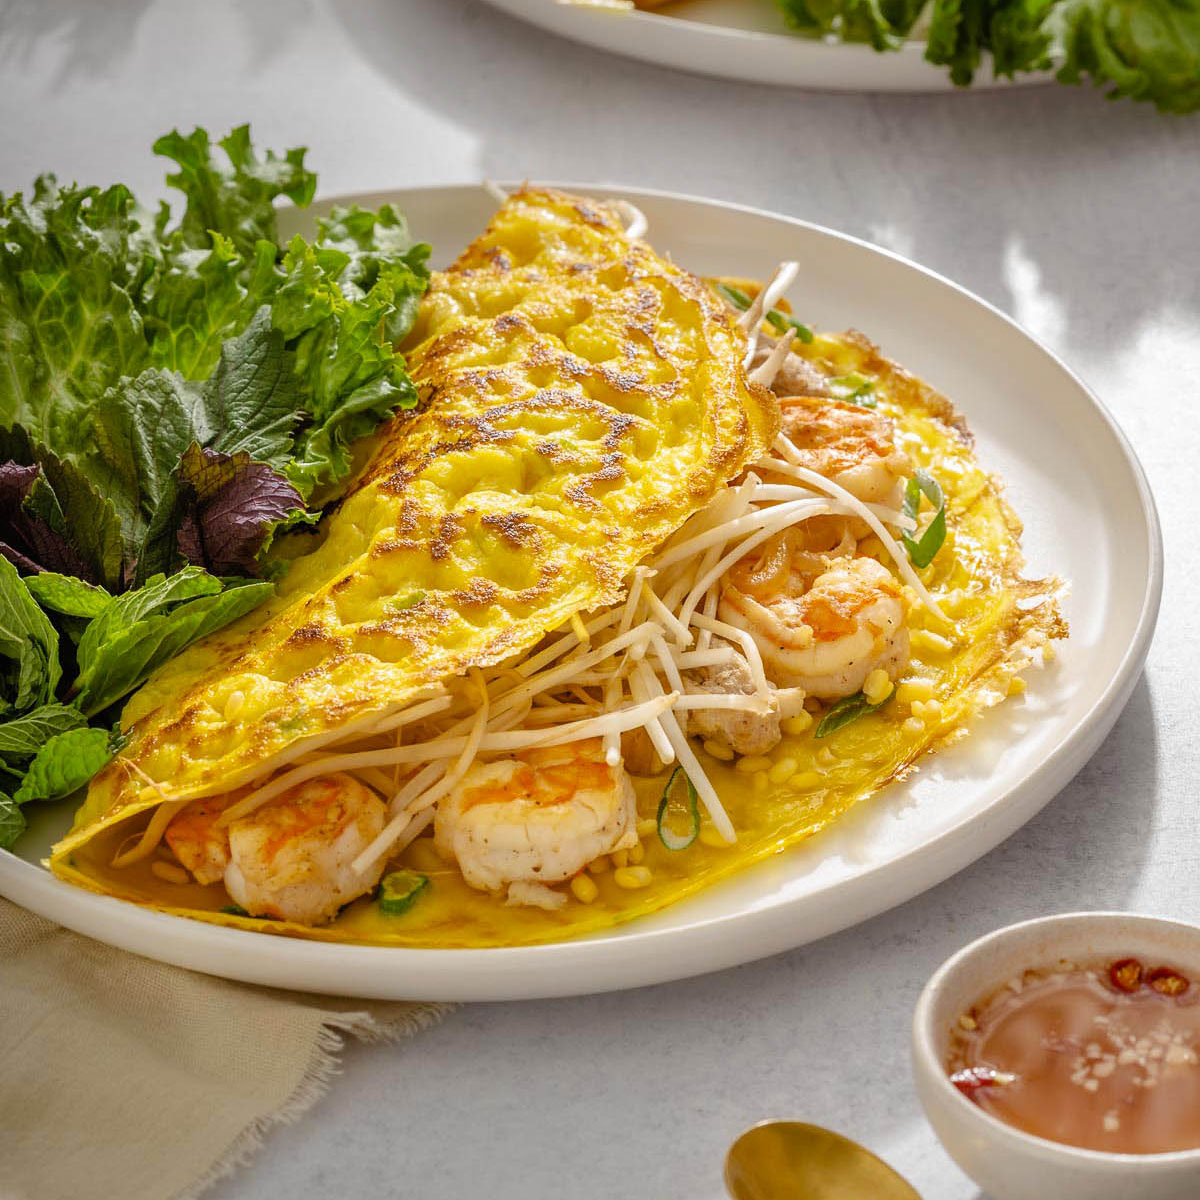 Top 20 must-try dishes in Ho Chi Minh City: Banh xeo - Vietnamese pancake stuffed with meat